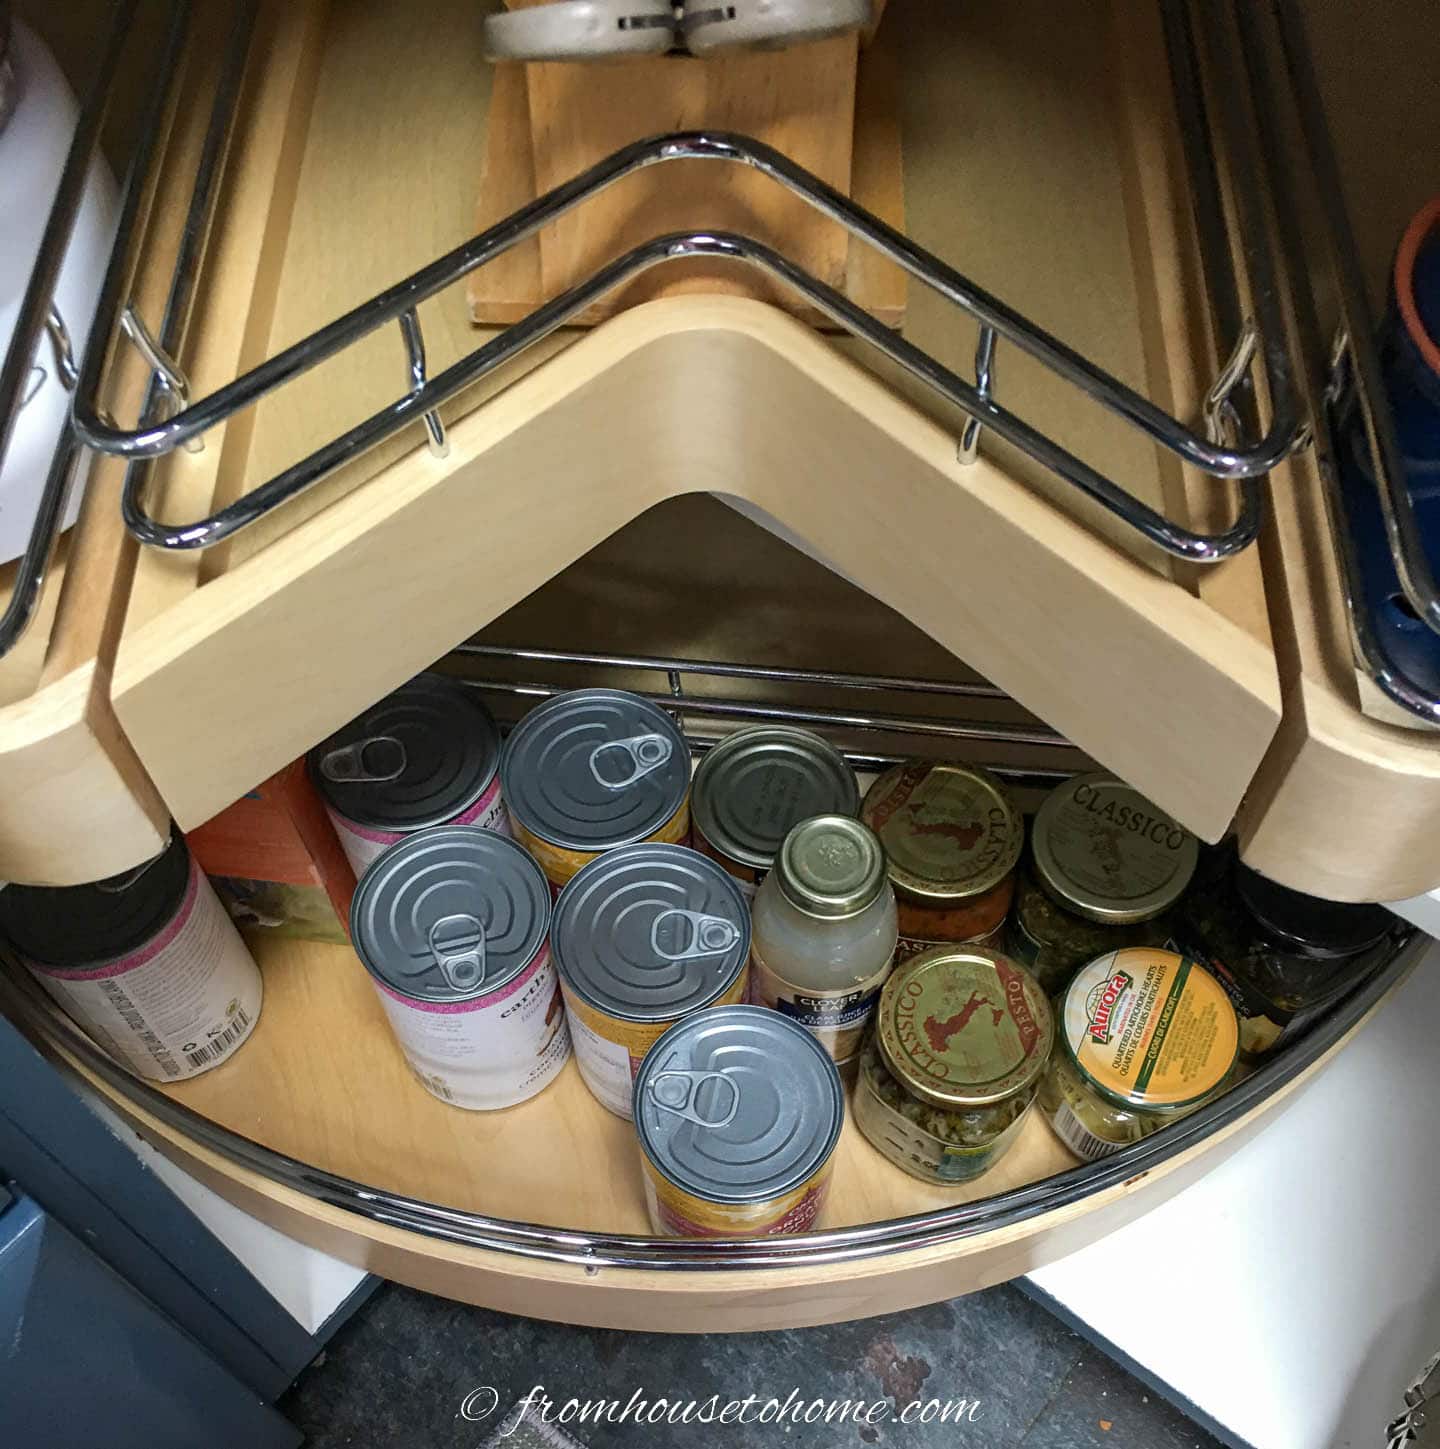 Corner cabinet lazy susan organizer with cans on it